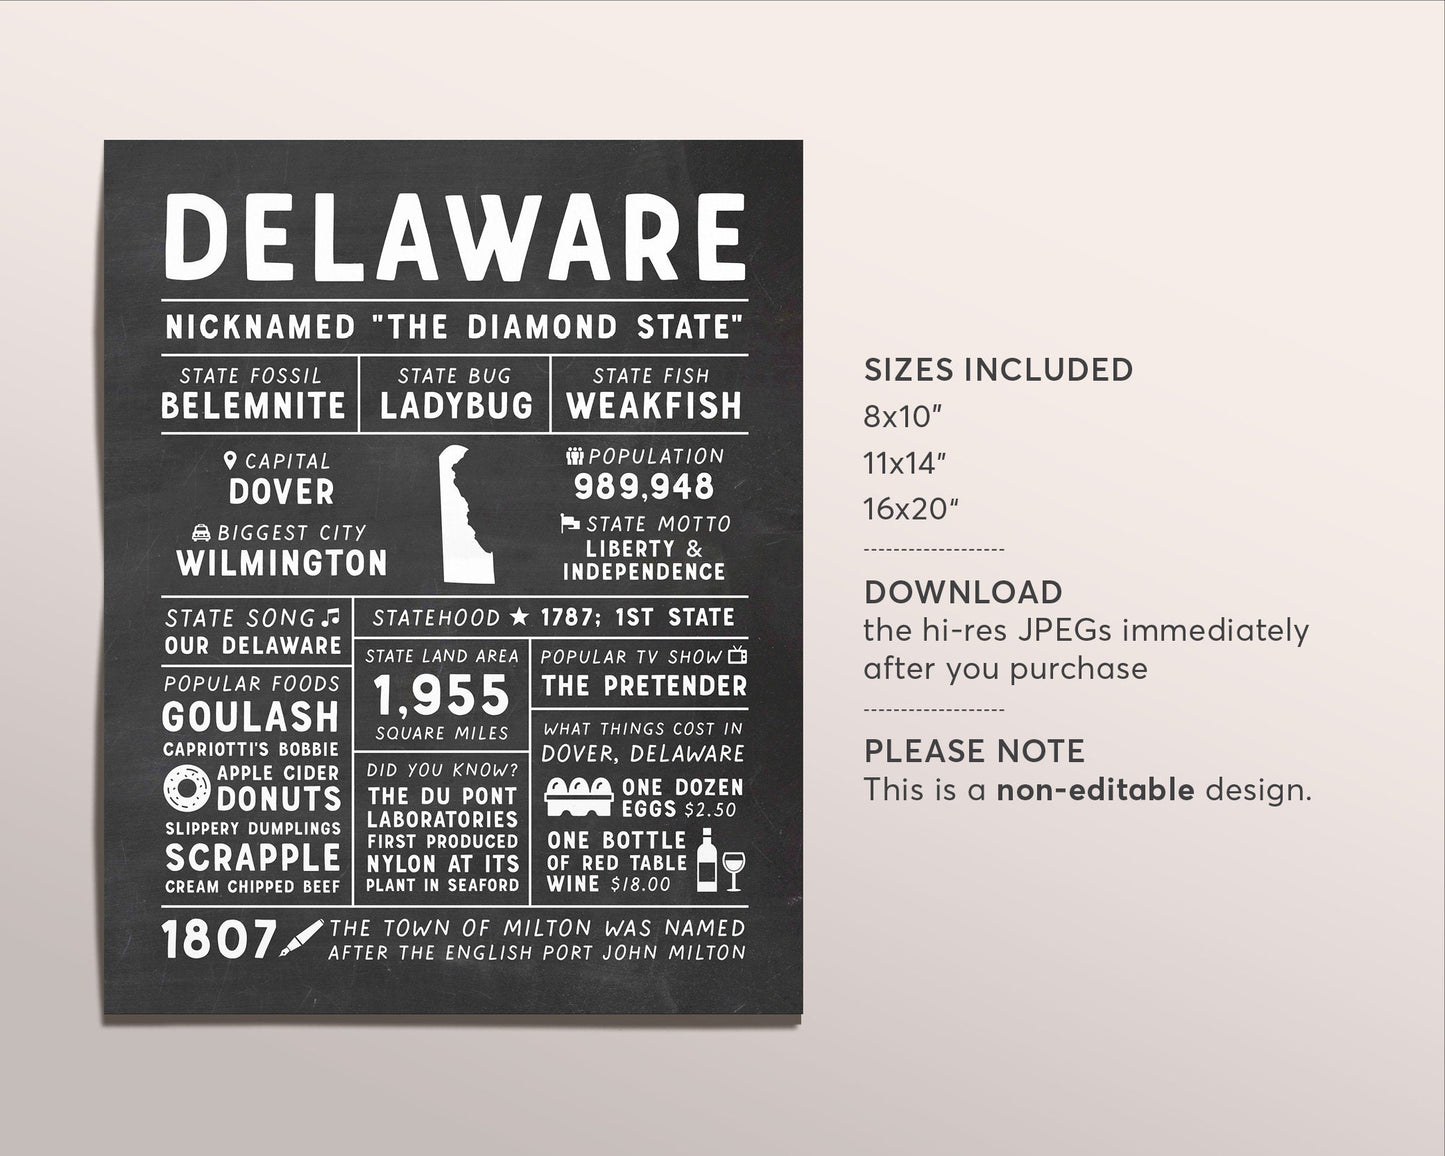 Delaware State Wall Art Sign Poster Infographic, Chalkboard Delaware Map, Wilmington Dover, US States, State Facts, Gifts For Men Friend Dad